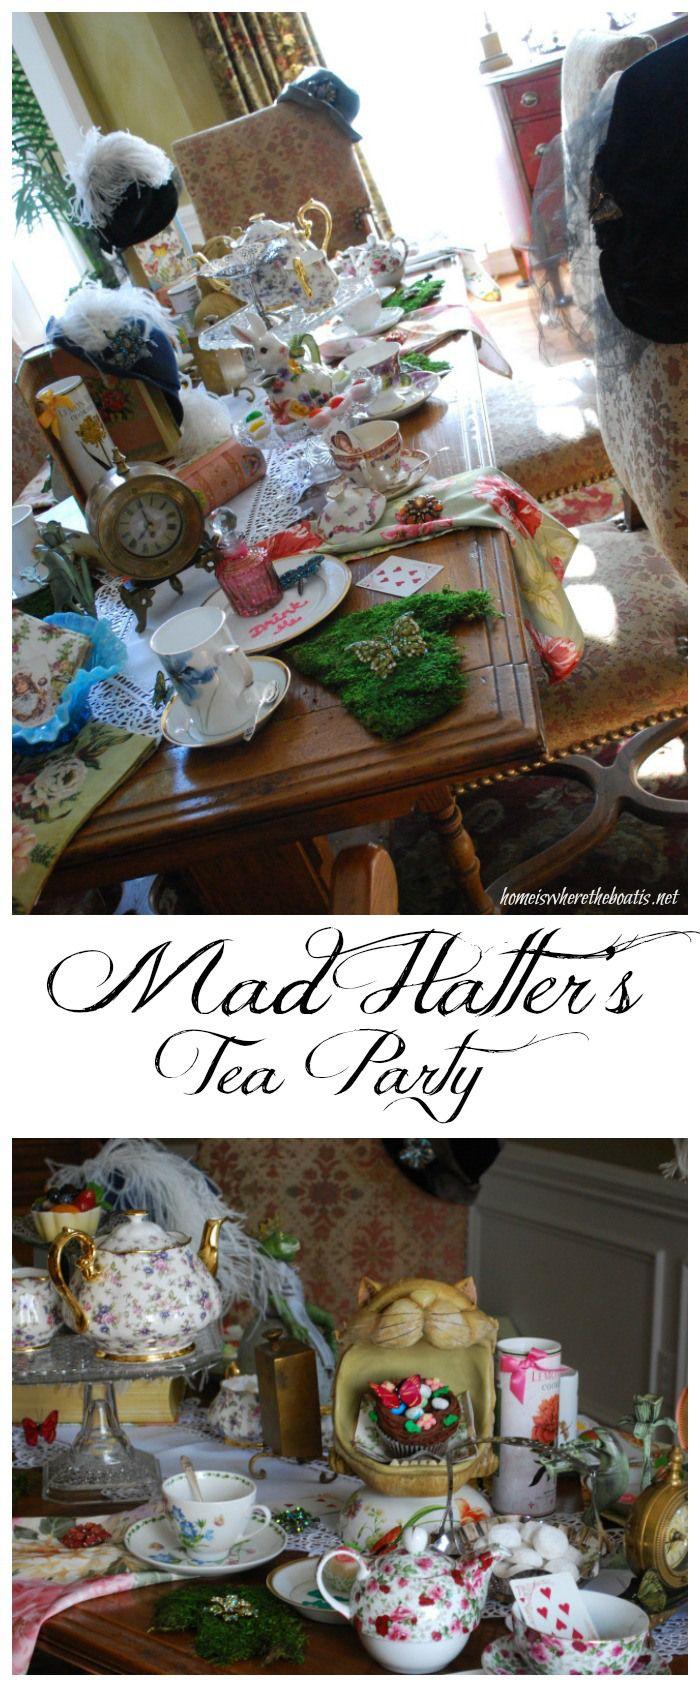 Wedding - Through The Looking Glass: A Mad Hatter's Tea Party